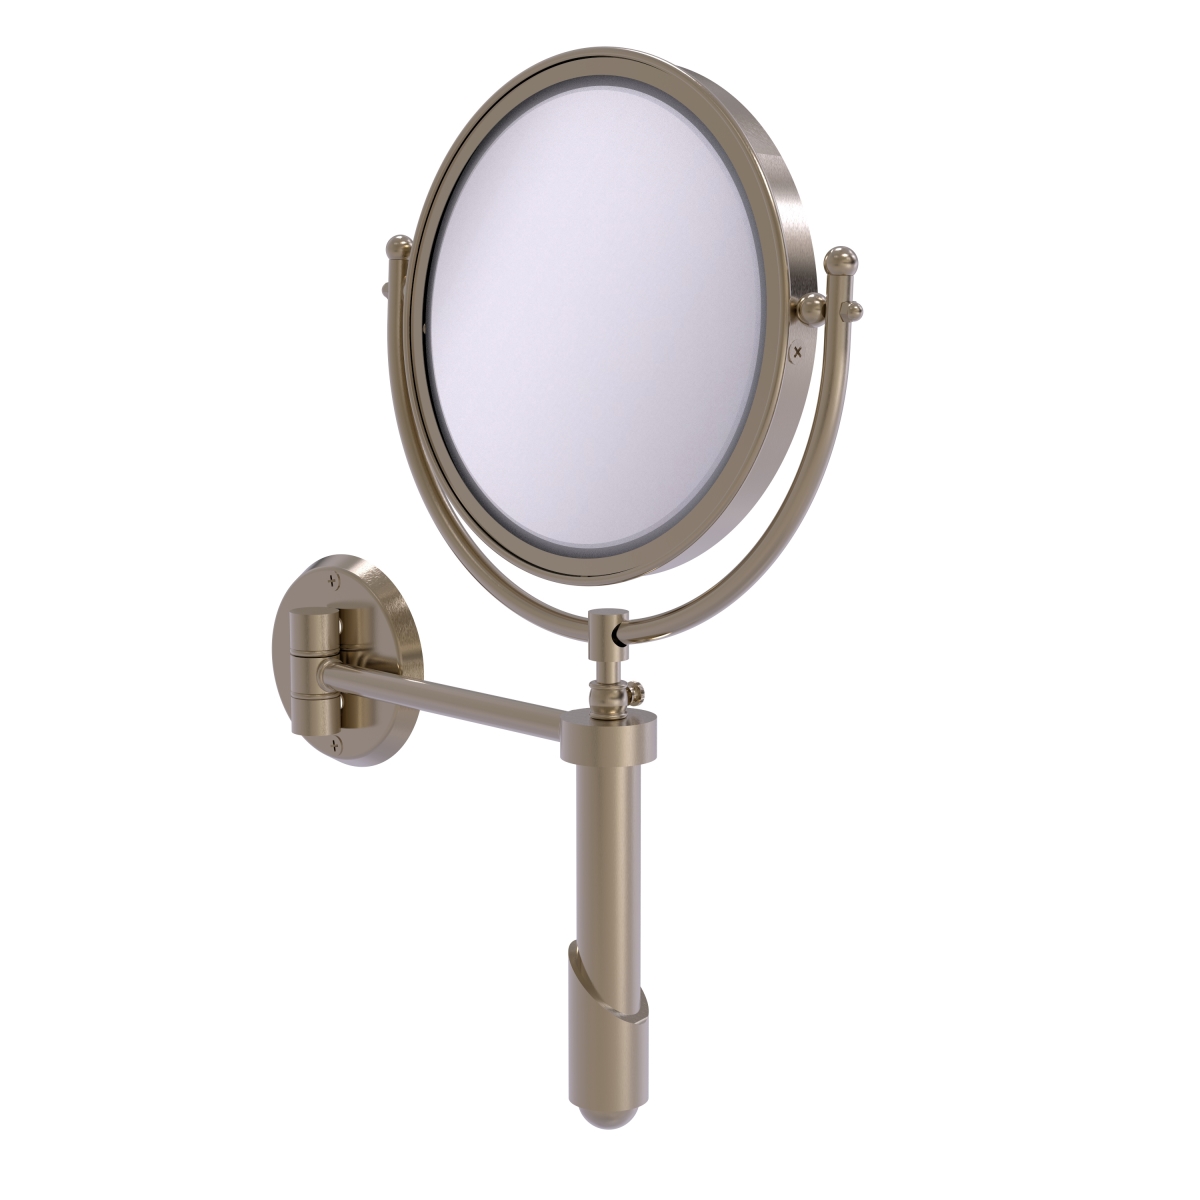 SHM-8-2X-PEW 8 in. dia. Soho Collection Wall Mounted Make-Up Mirror with 2X Magnification, Antique Pewter -  Allied Brass, SHM-8/2X-PEW